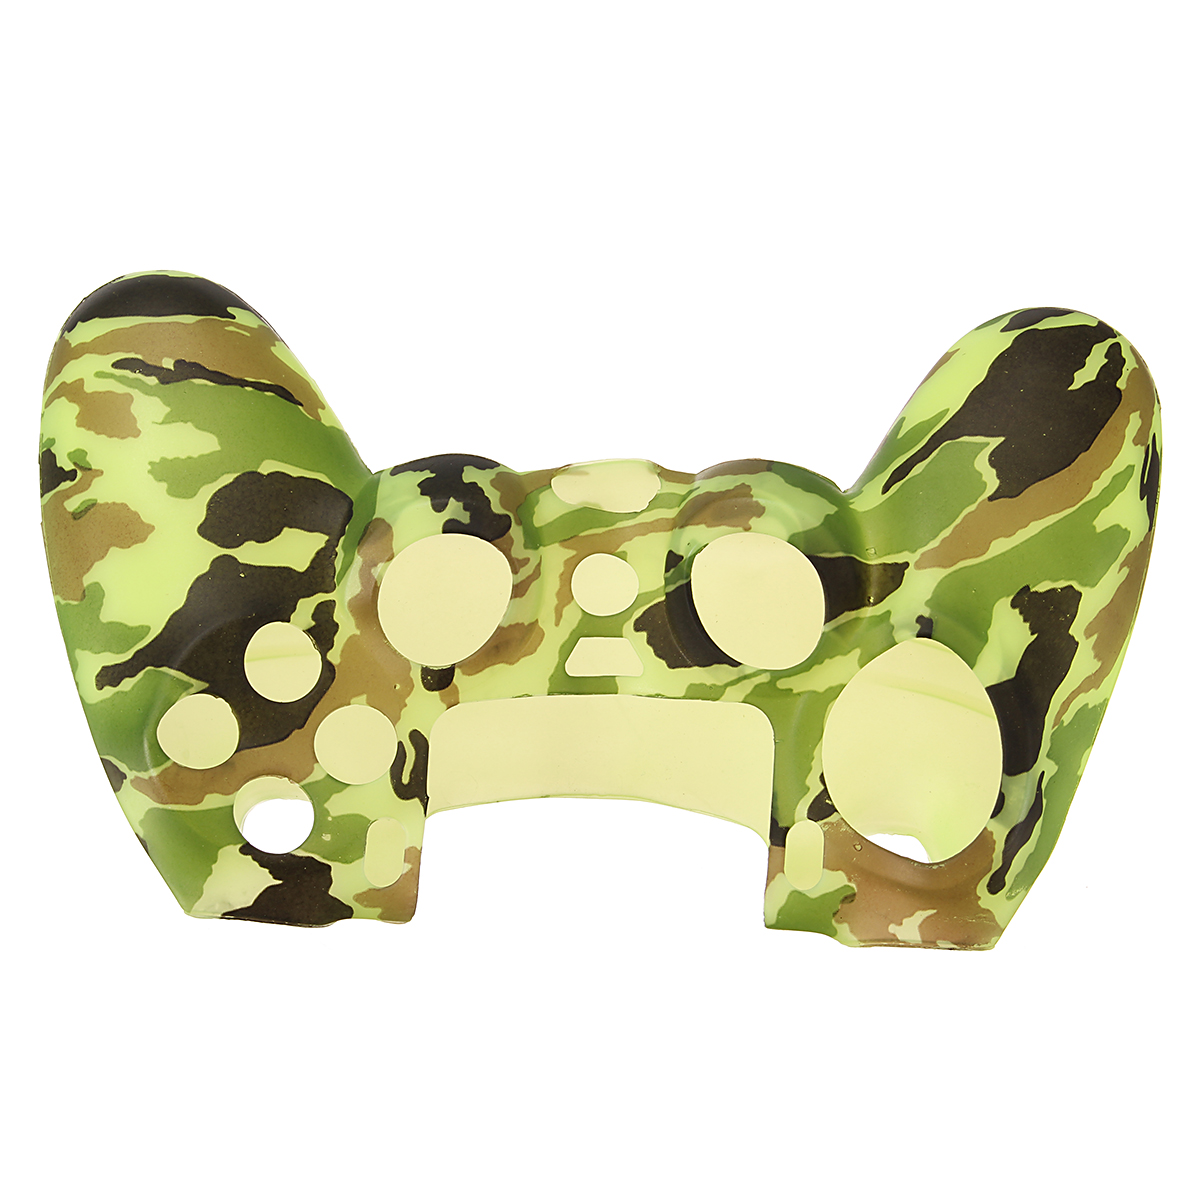 Durable Decal Camouflage Grip Cover Case Silicone Rubber Soft Skin Protector for Playstation 4 for Dualshock 4 Gamepad 53